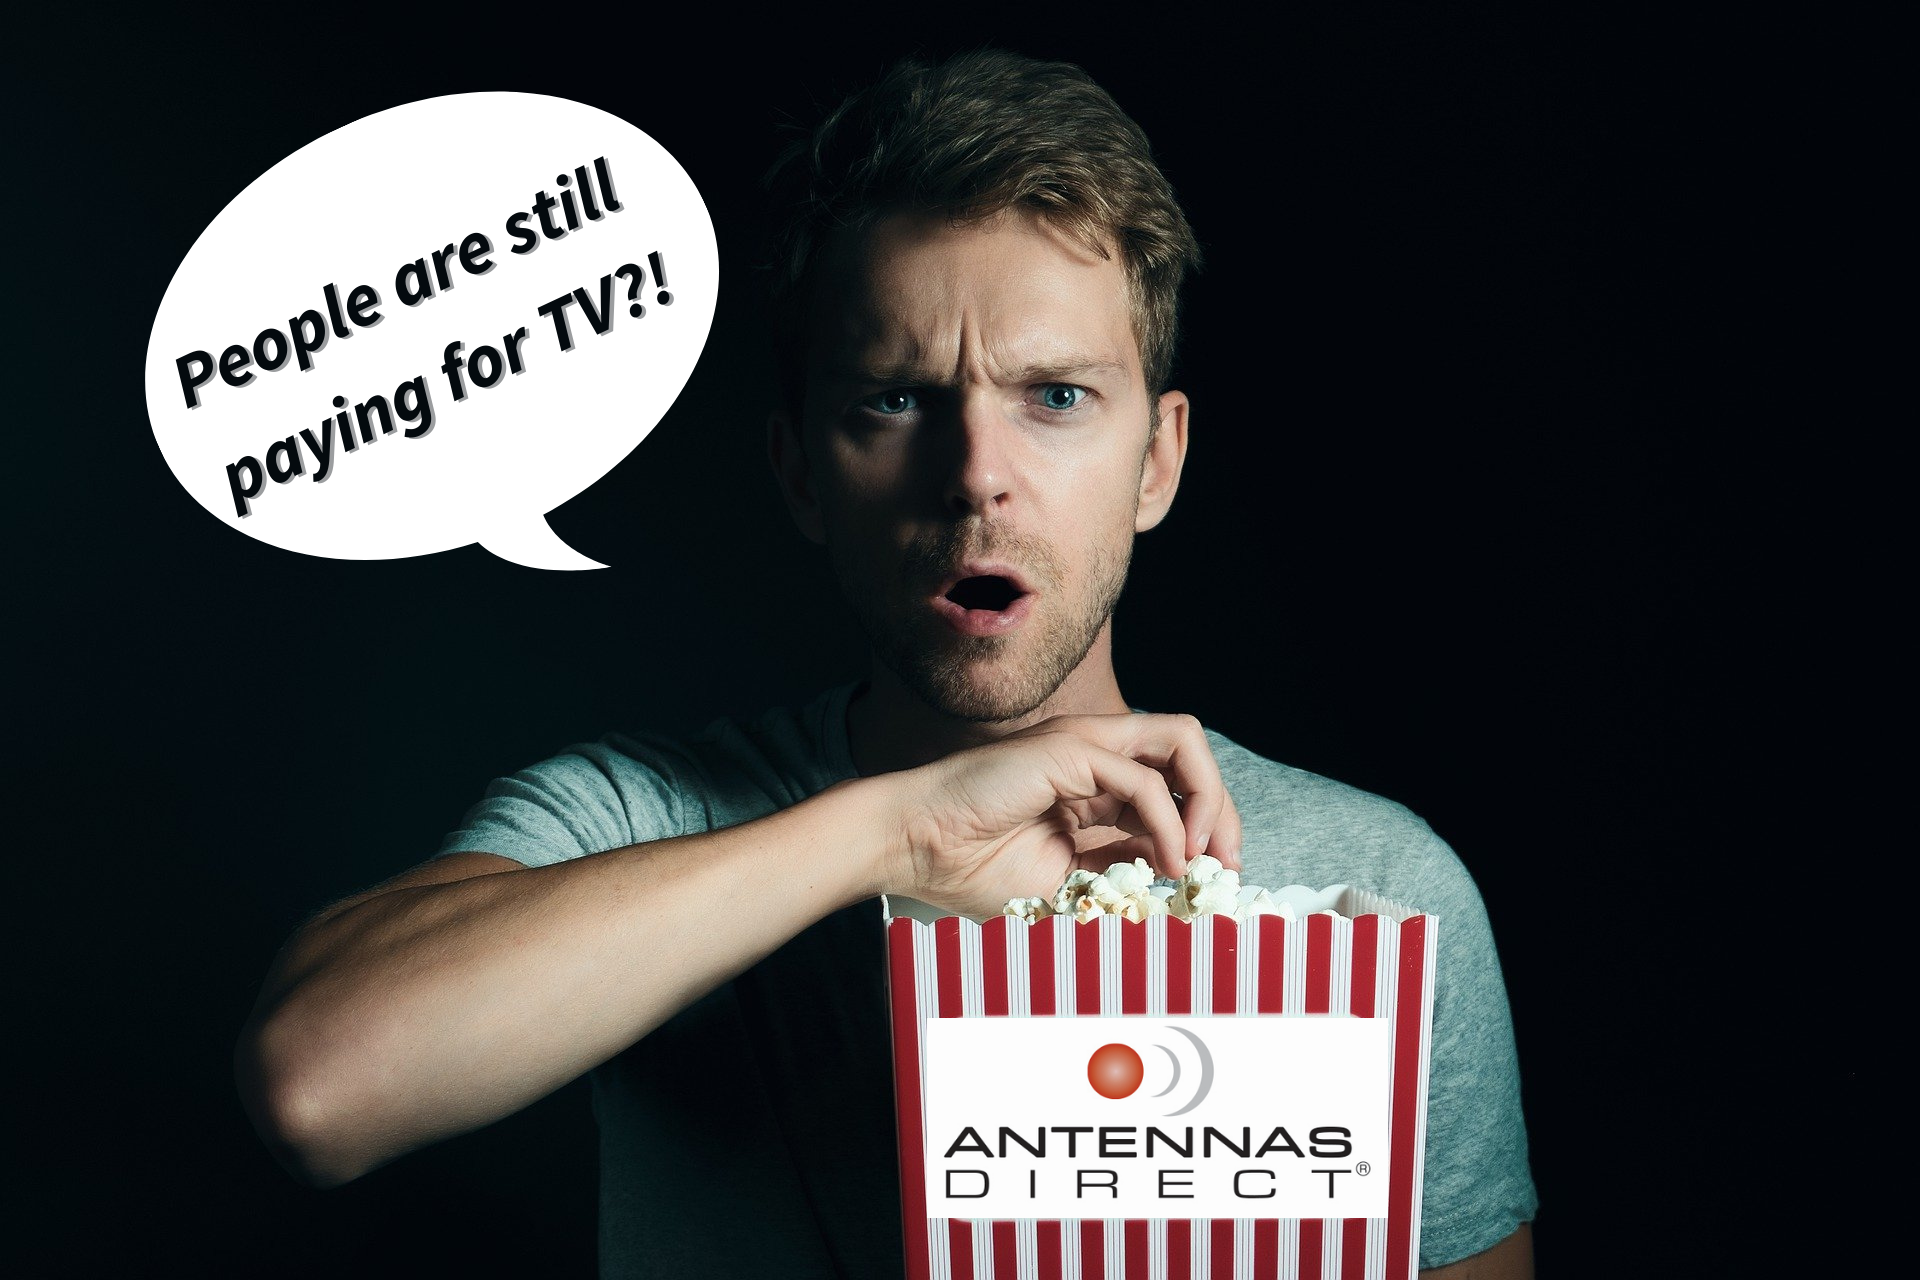 People are still paying for TV?! Surprised guy eating popcorn with Antennas Direct logo